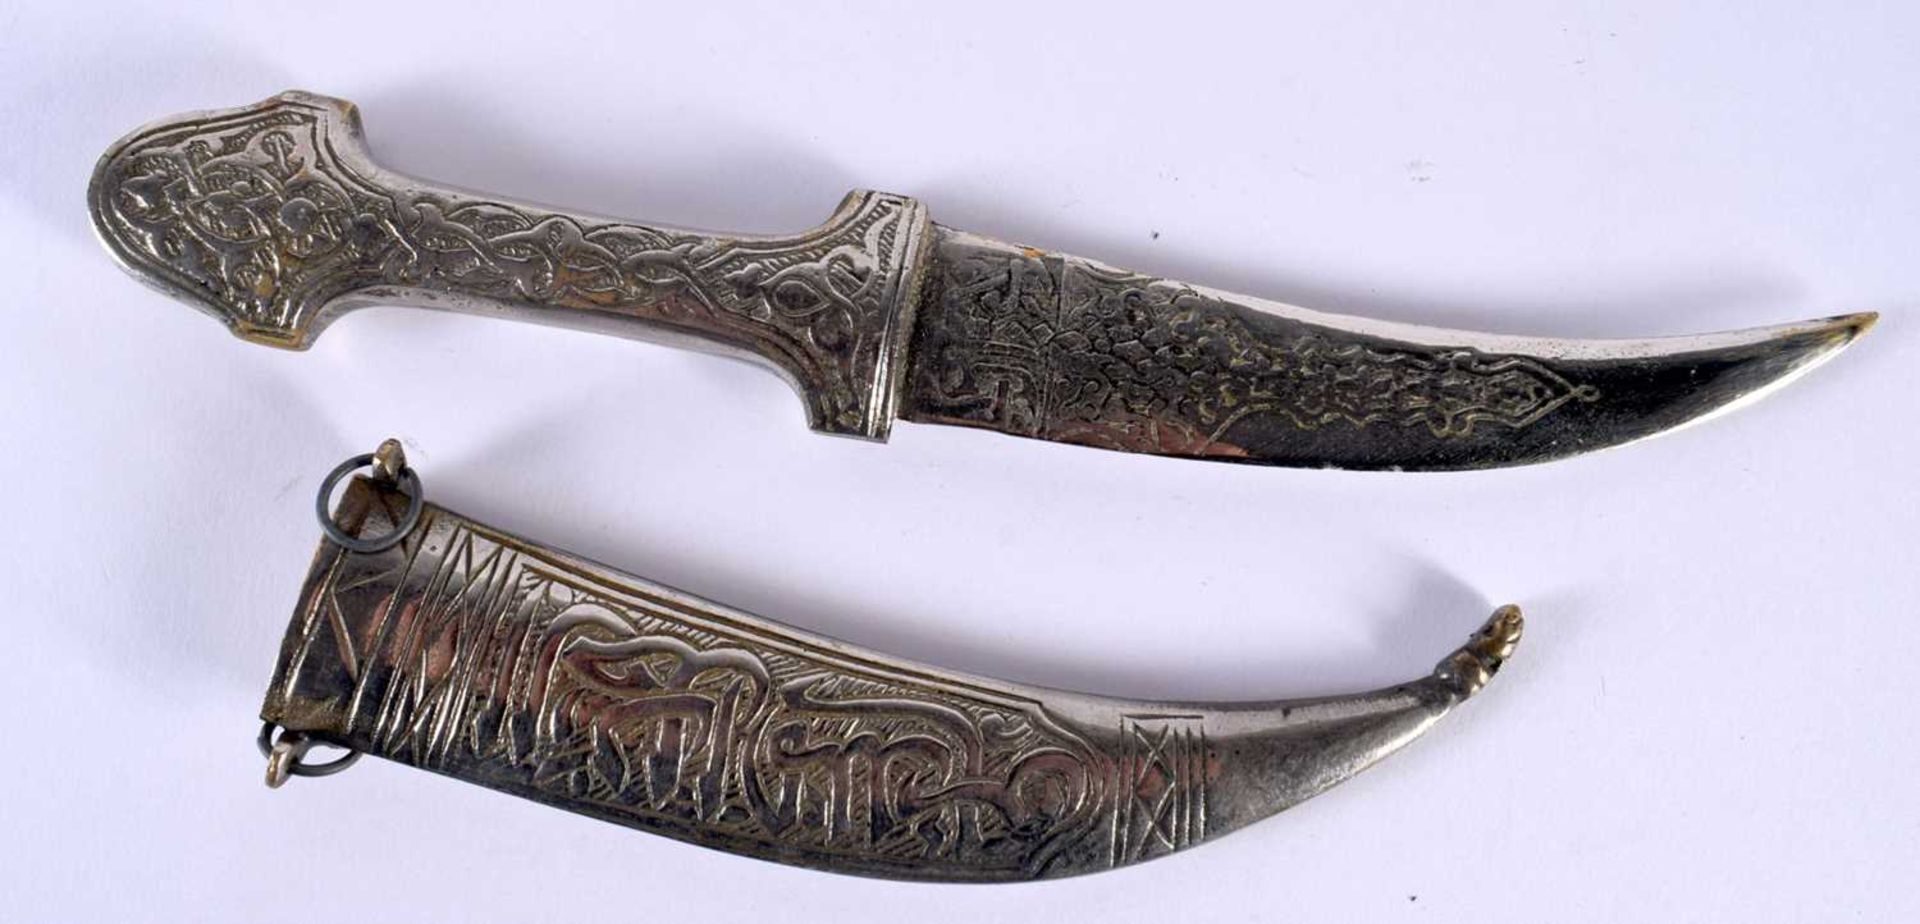 A Middle Eastern Dagger with calligraphic Inscription. 27 cm long.